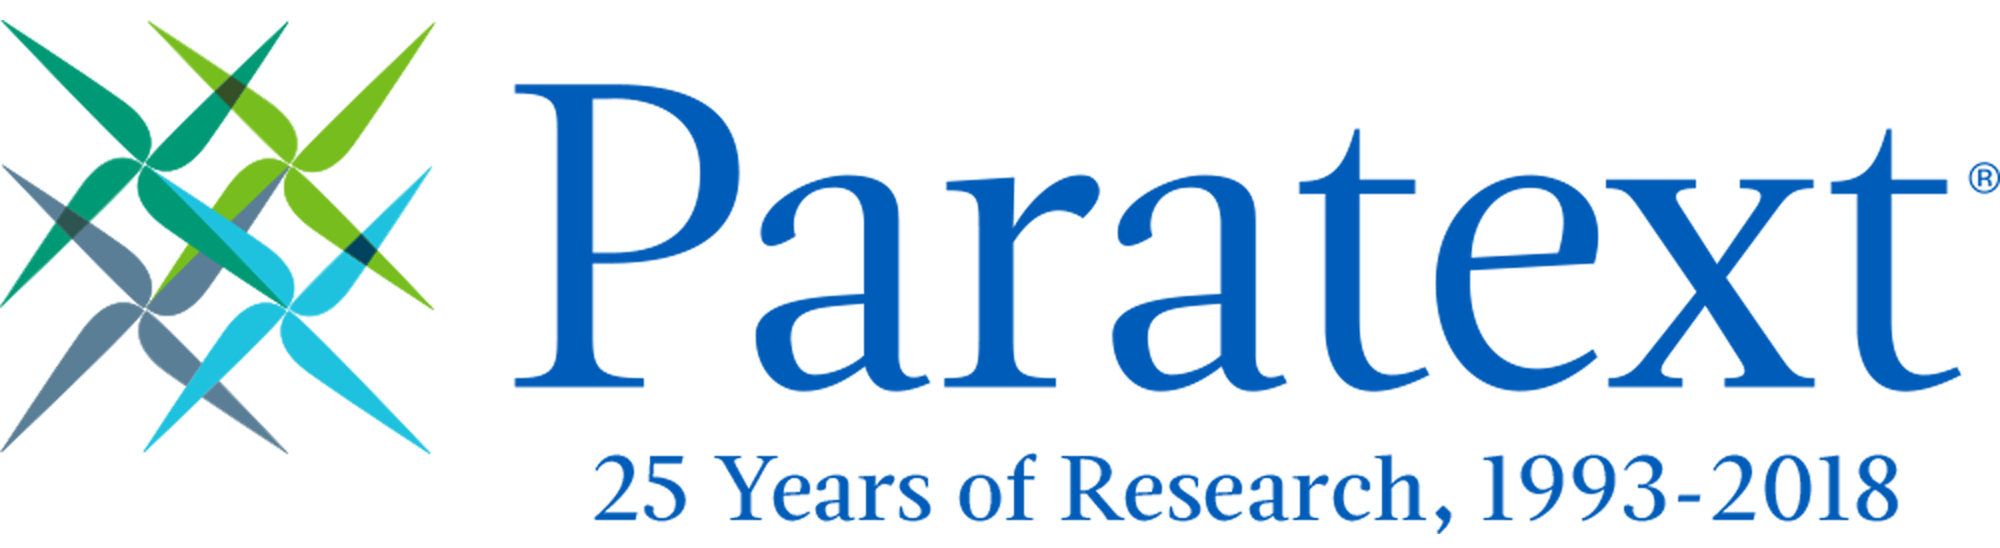 Paratext Celebrates 25 Years of Research, 1993-2018